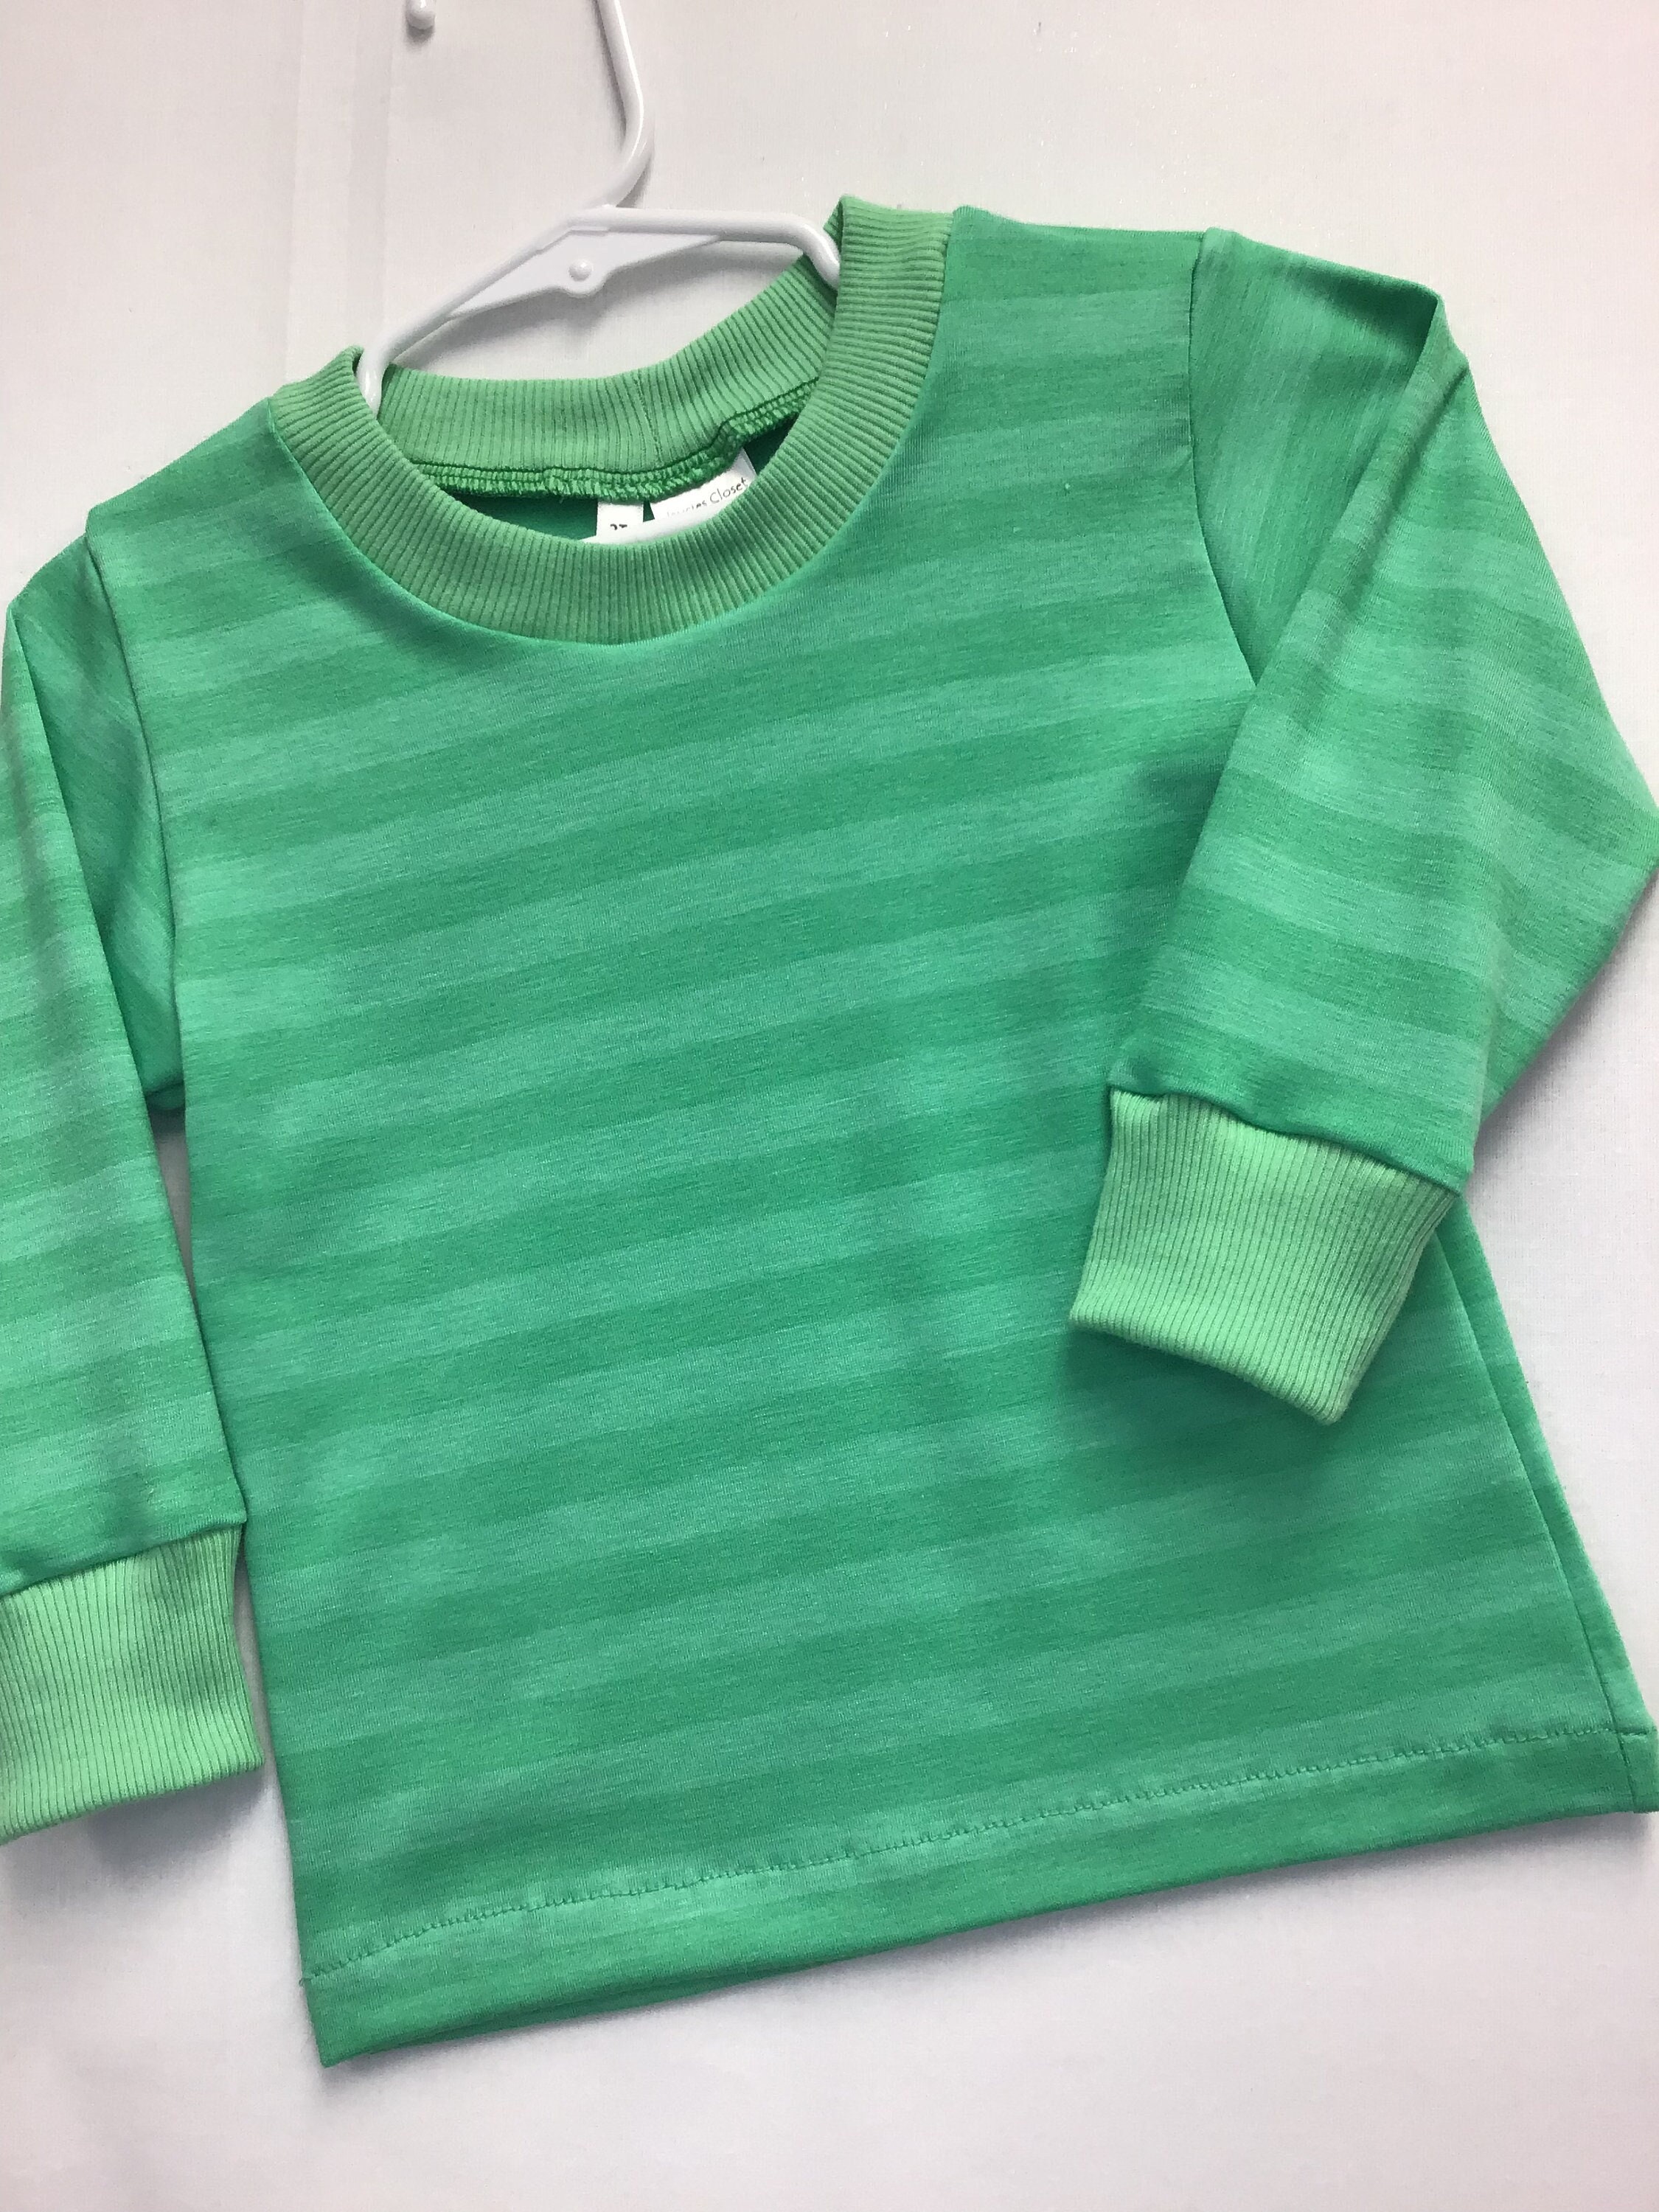 Two Tone Striped T-shirt, Green, Baby and Toddler - Etsy